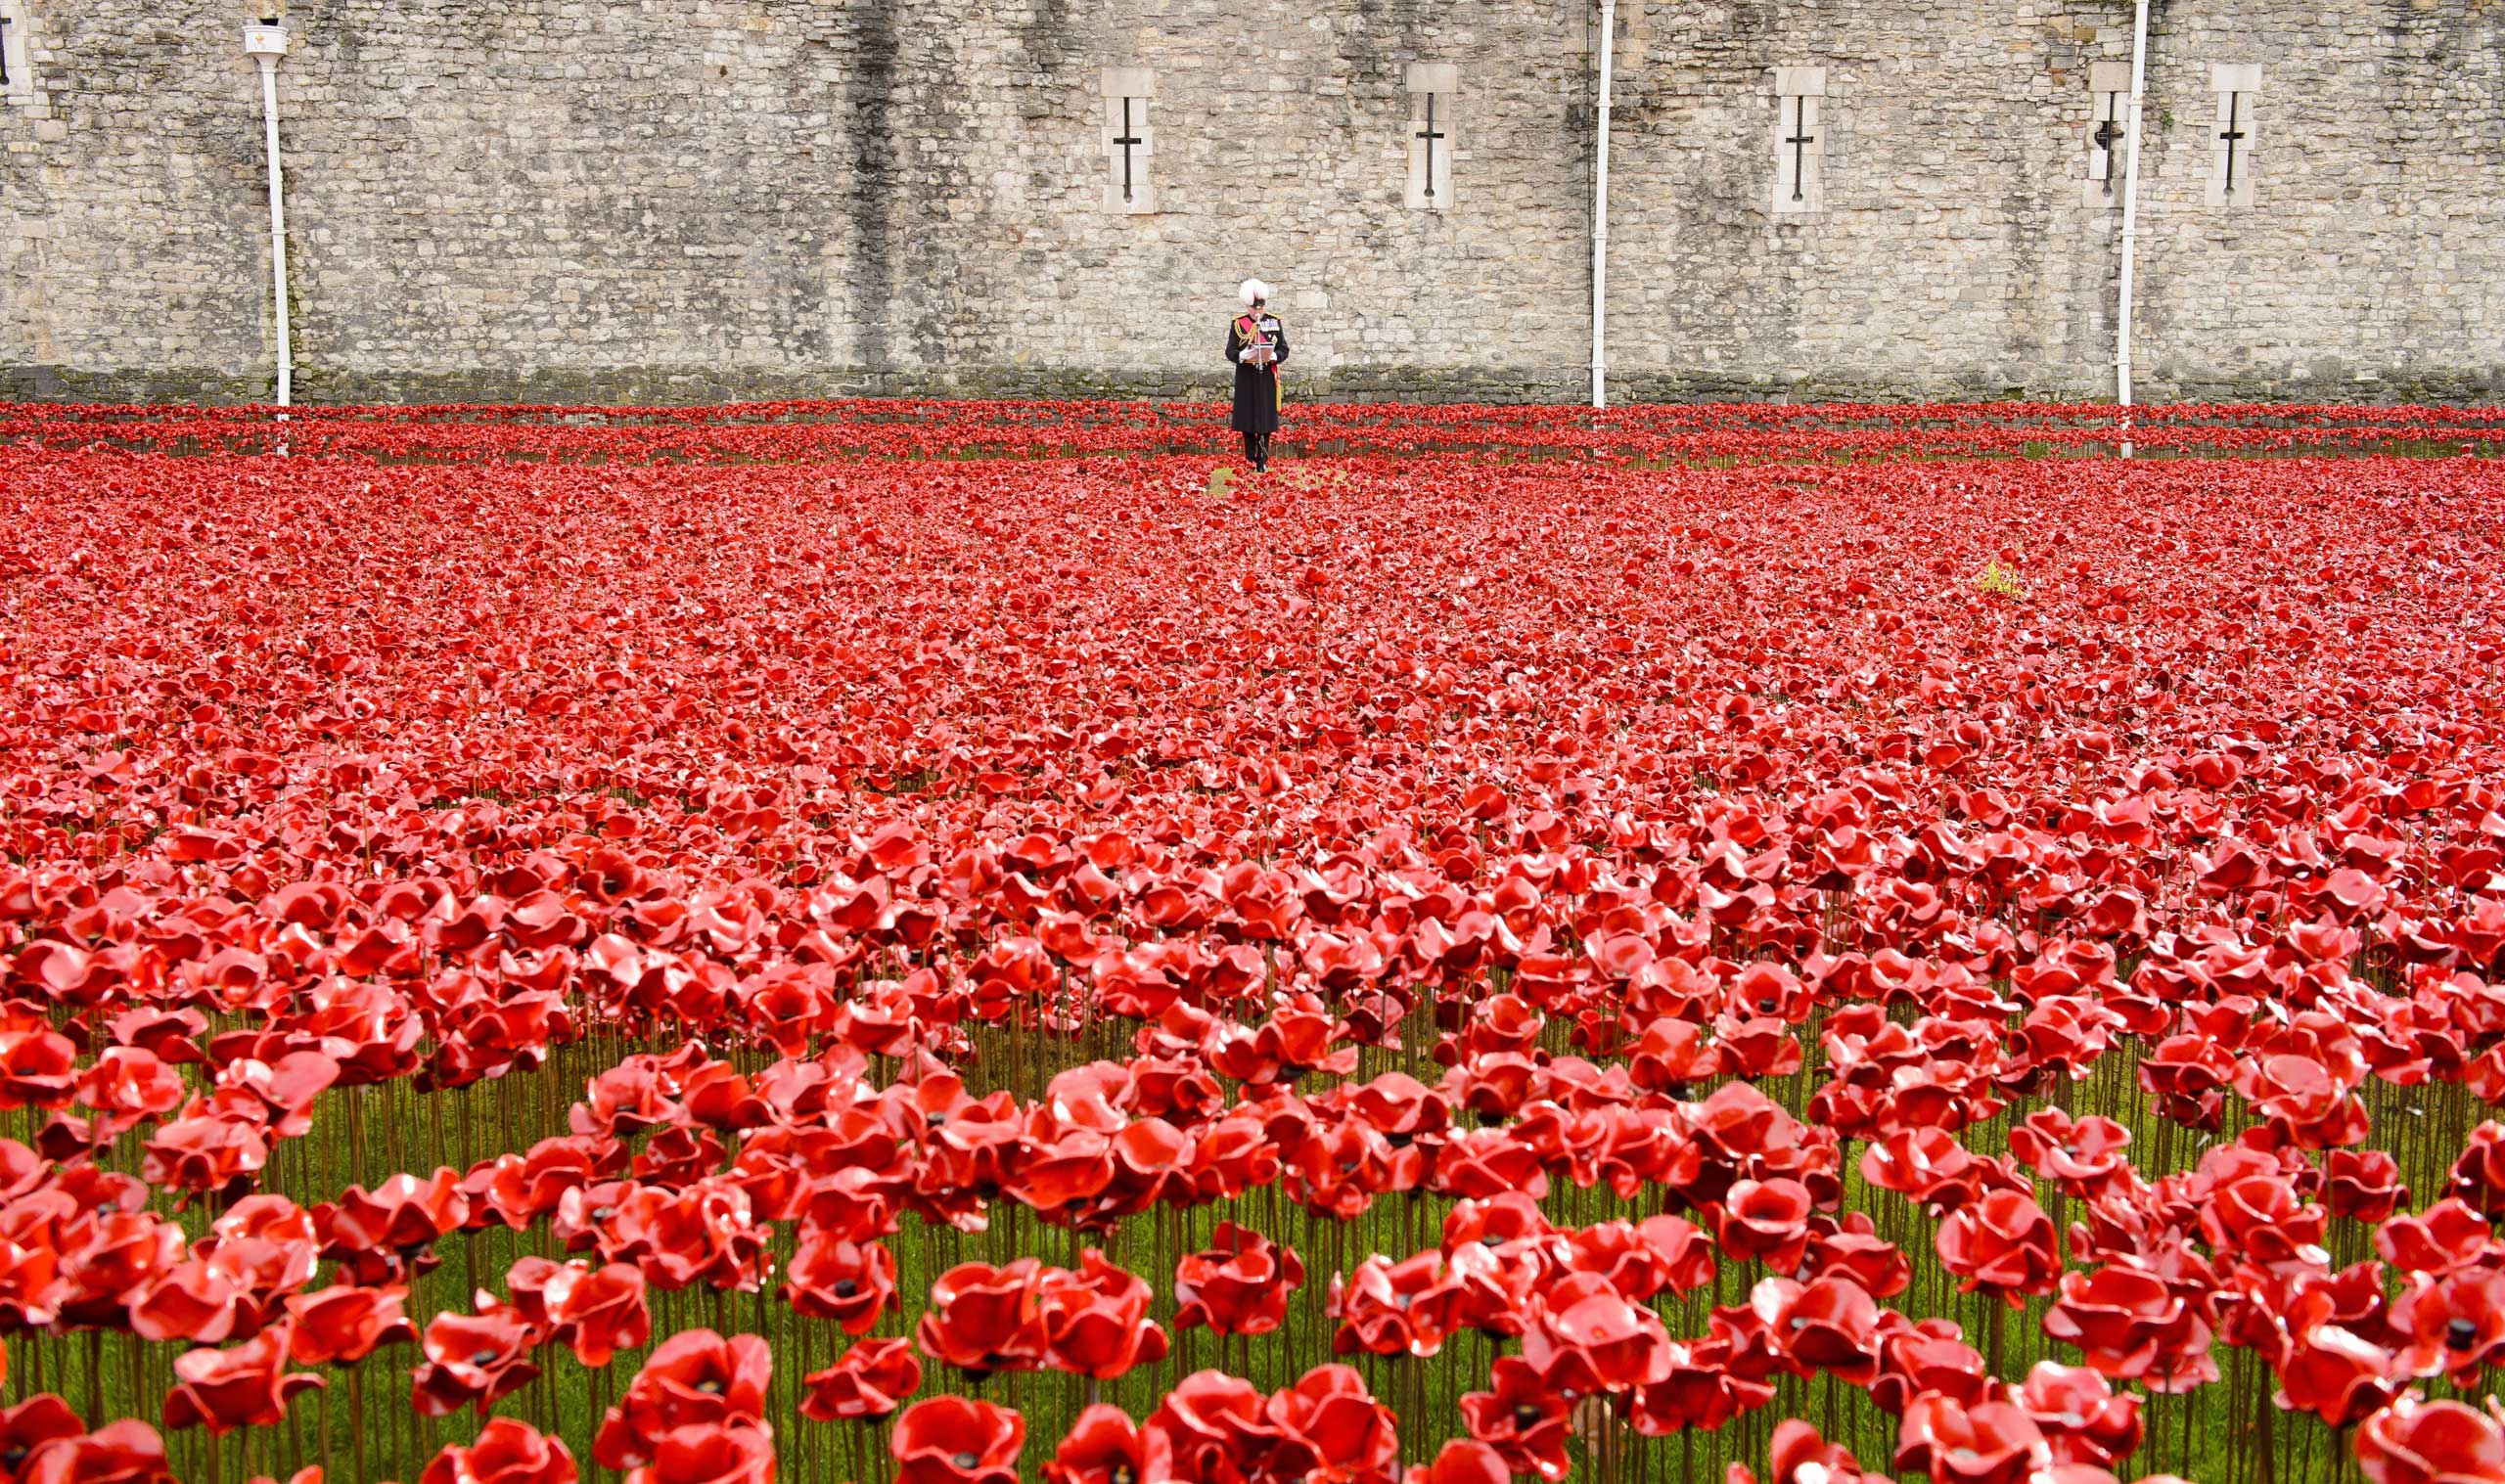 Nov. 11, 2014. The names of the war dead are read out at the Blood Swept Lands and Seas of Red poppy installation at The Tower of London on Armistice Day in London.